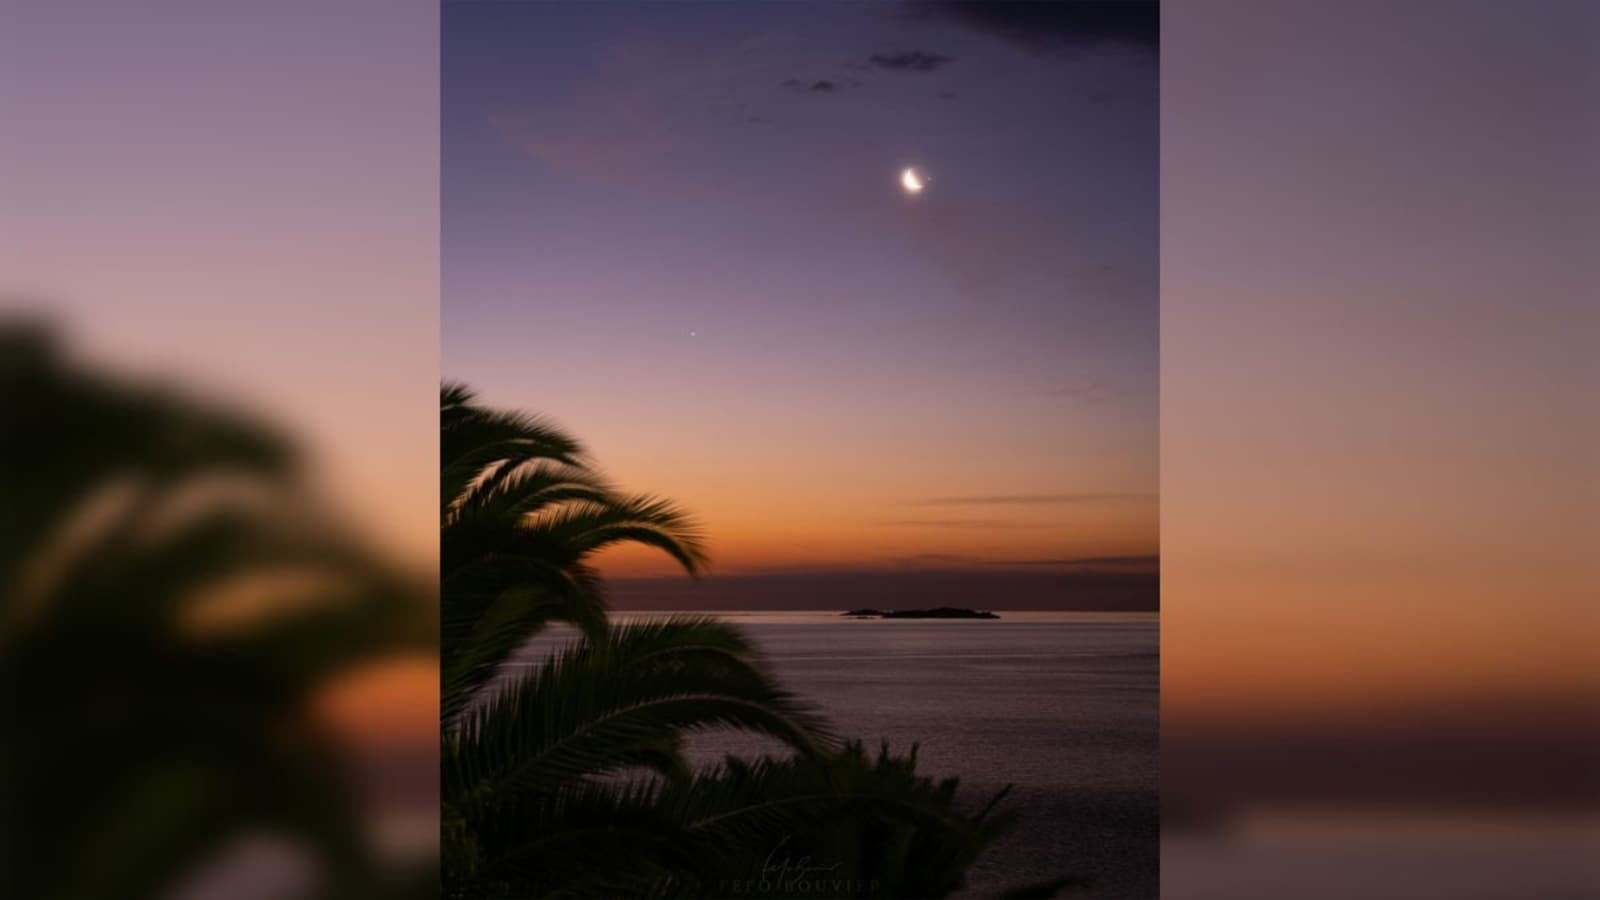 NASA Astronomy Picture of the Day 25 Feb 2023: Moon shares sky with Venus, Jupiter